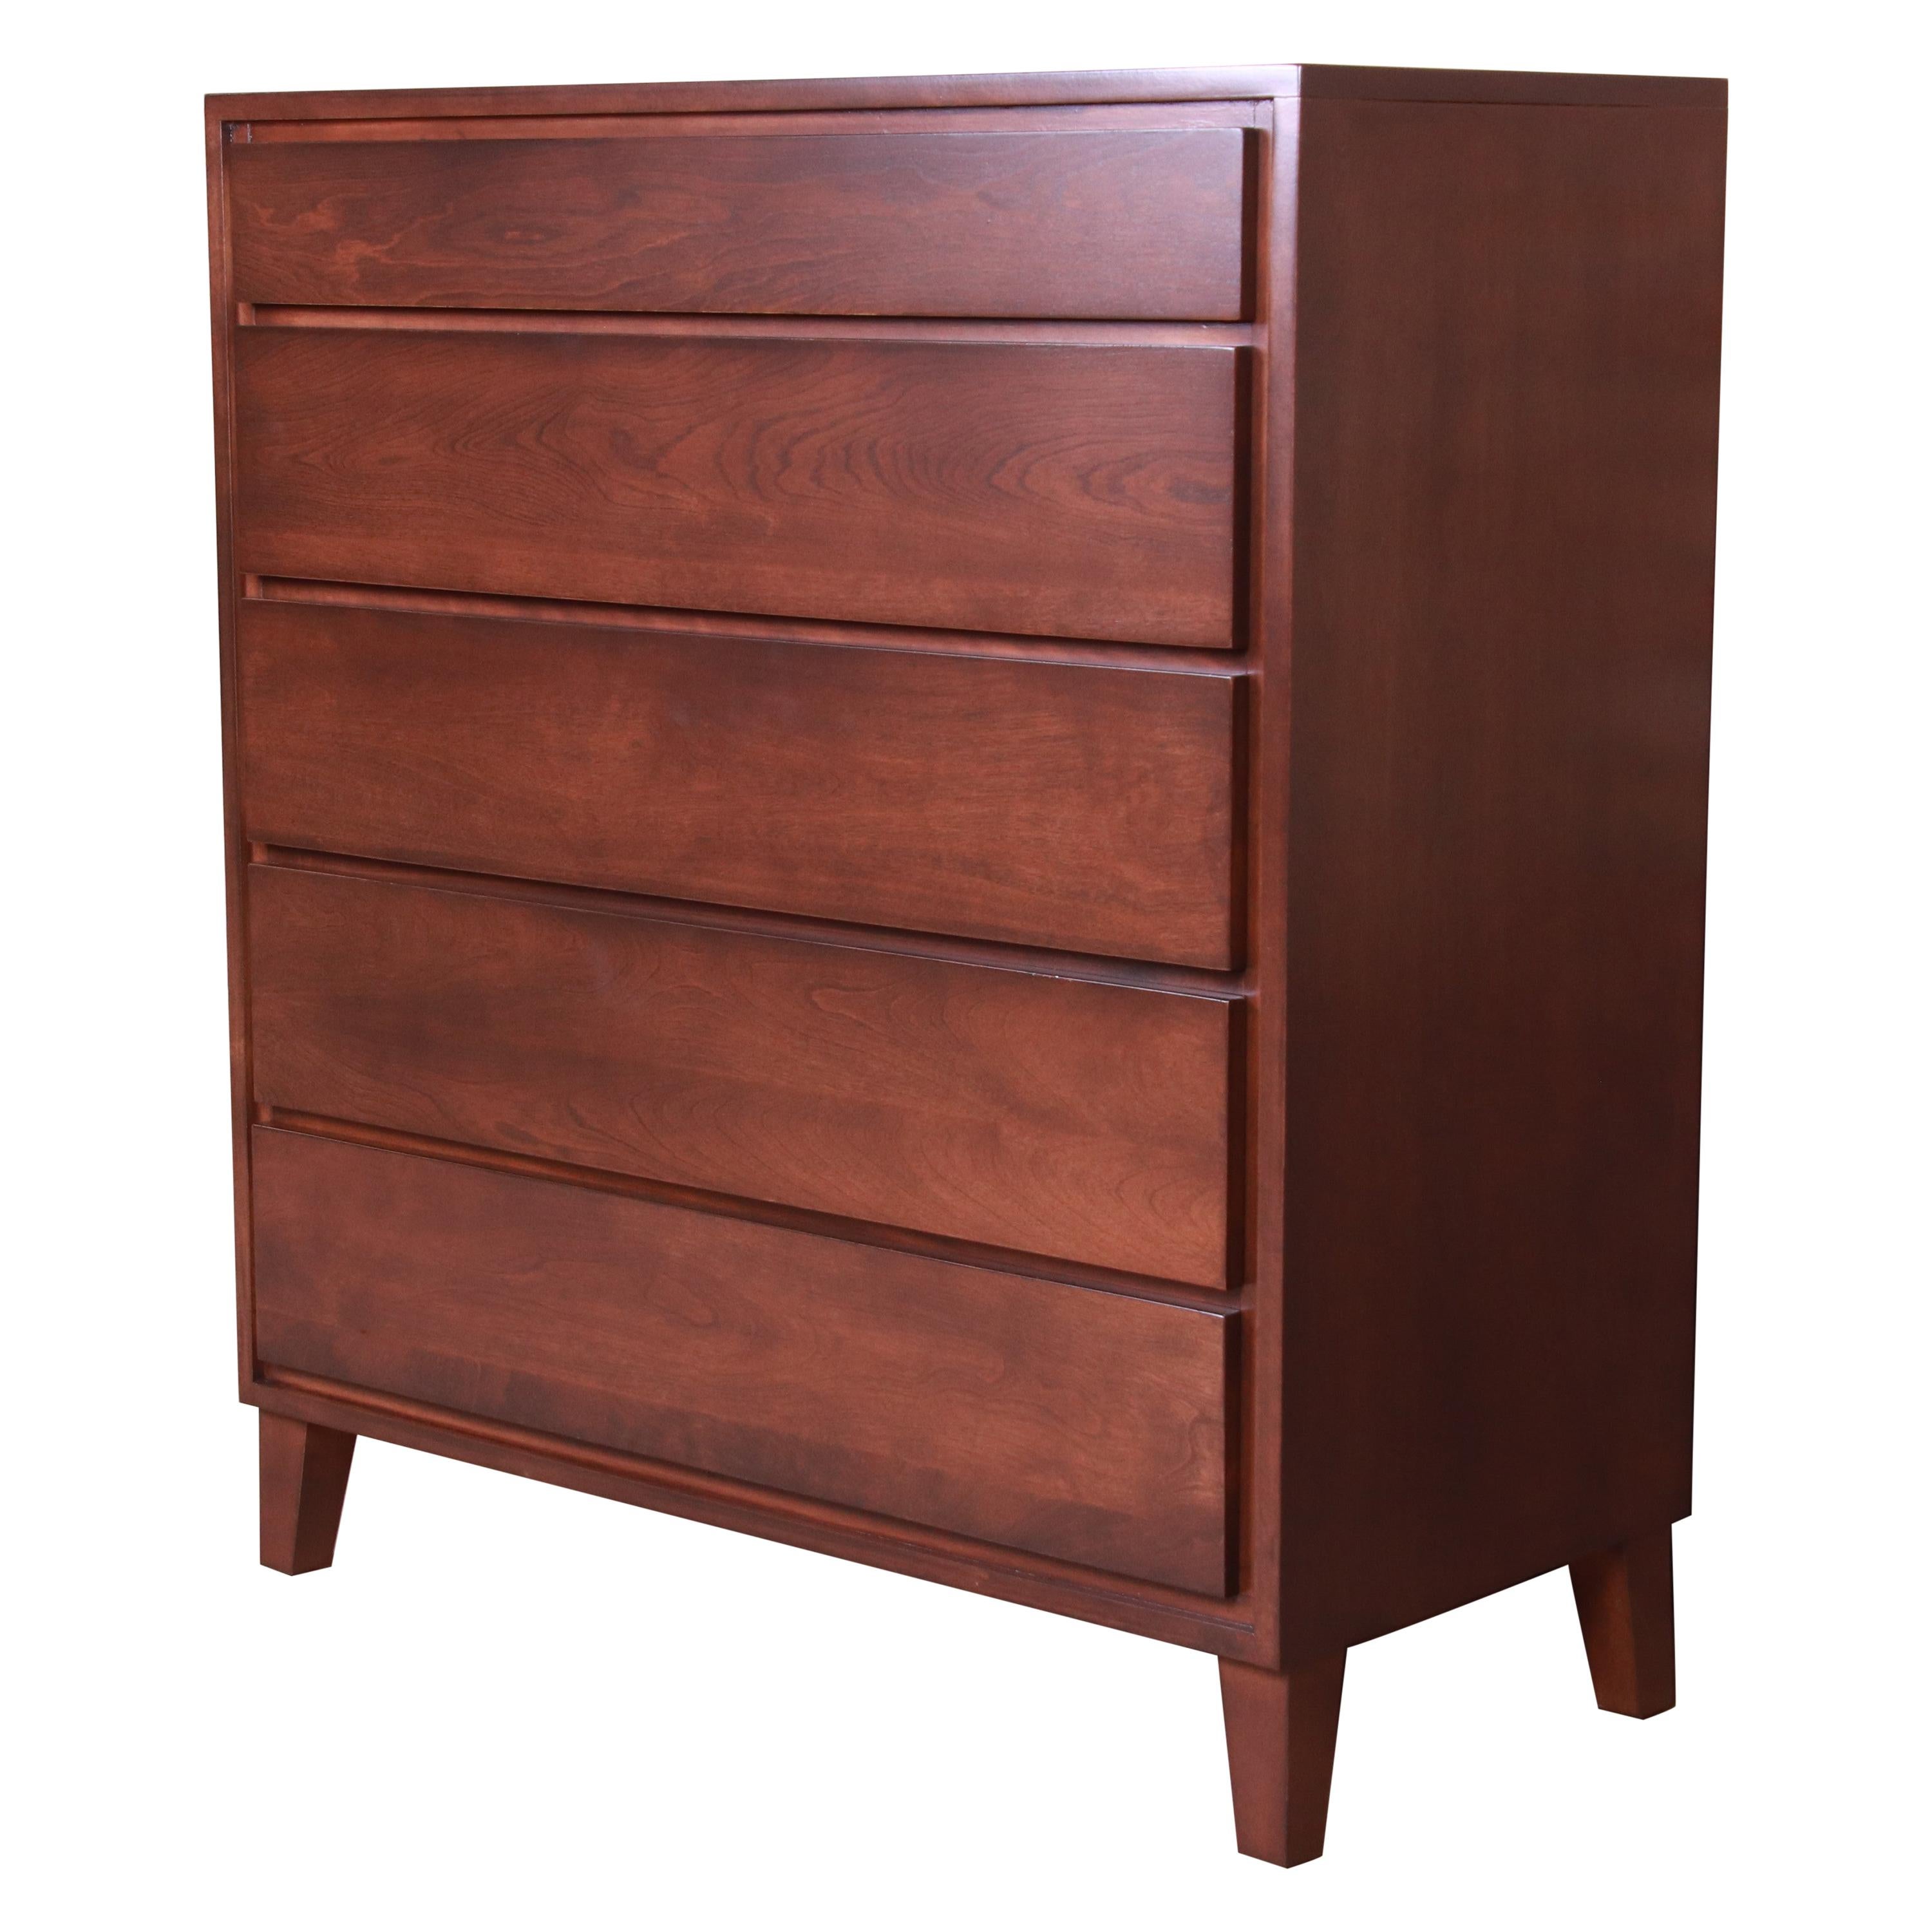 Leslie Diamond for Conant Ball Solid Birch Chest of Drawers, Newly Refinished